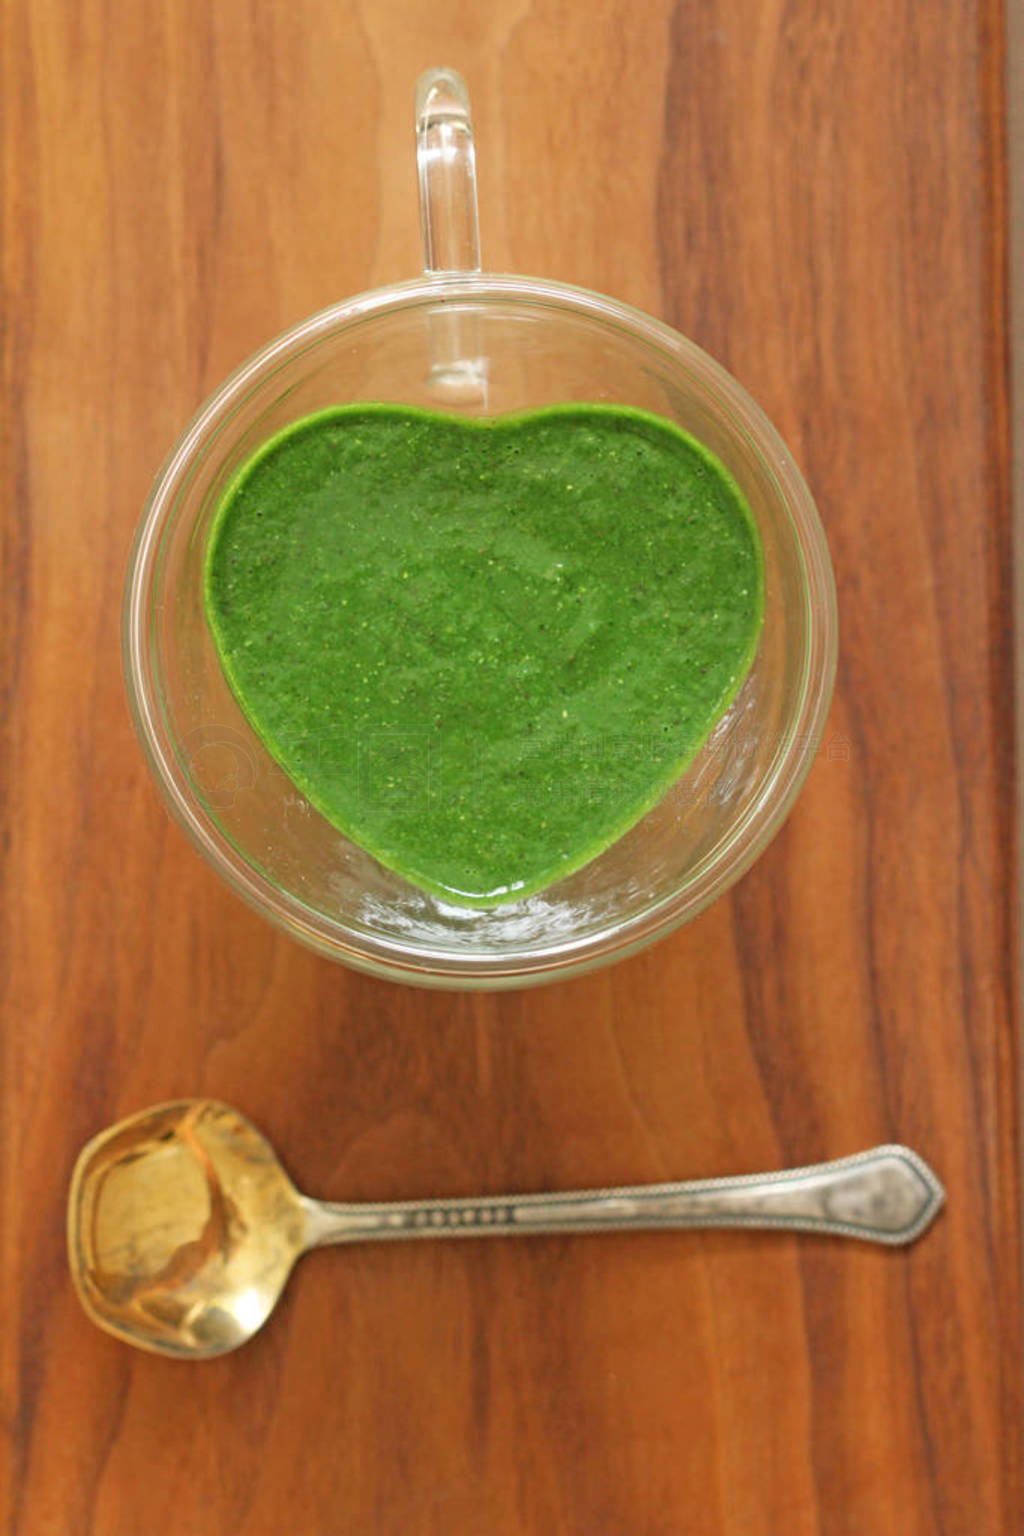 Spinach smoothie on wooden background. Fruit green smoothies in